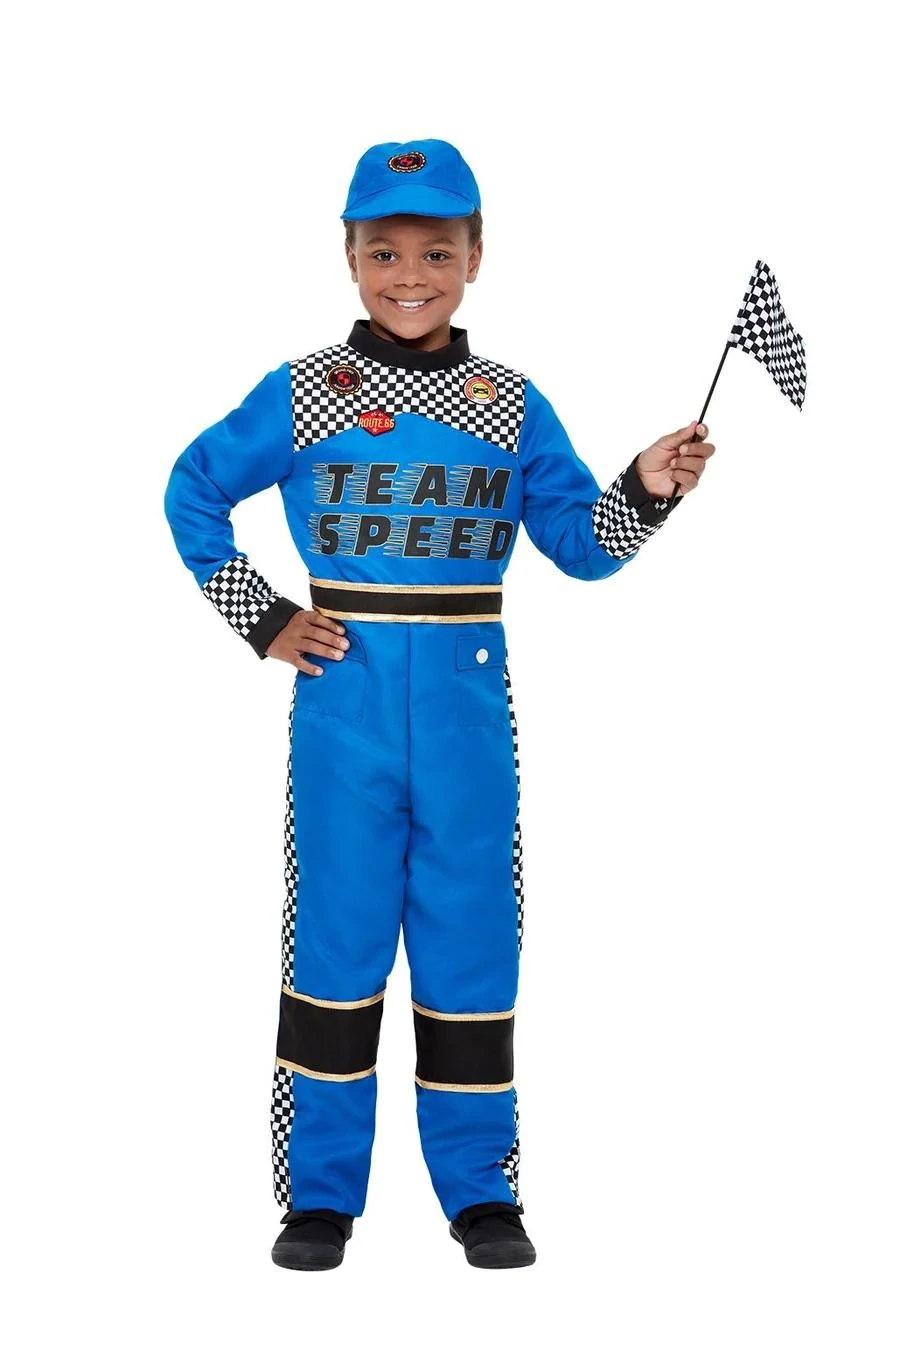 Race driver - Large - Age 10 to 12 years